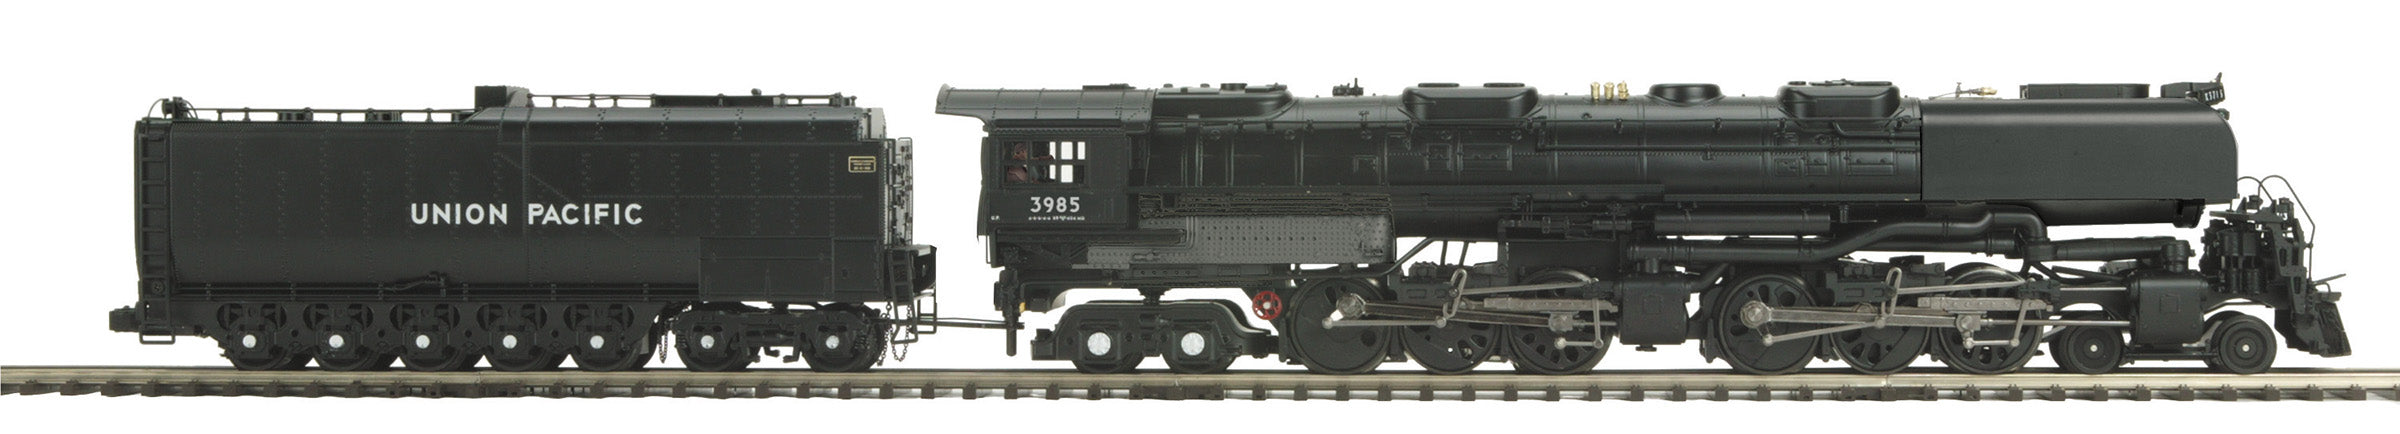 MTH 20-3895-1 - 4-6-6-4 Challenger Steam Engine "Union Pacific" #3985 w/ PS3 + Smoke Deflectors (Black - Oil Tender)